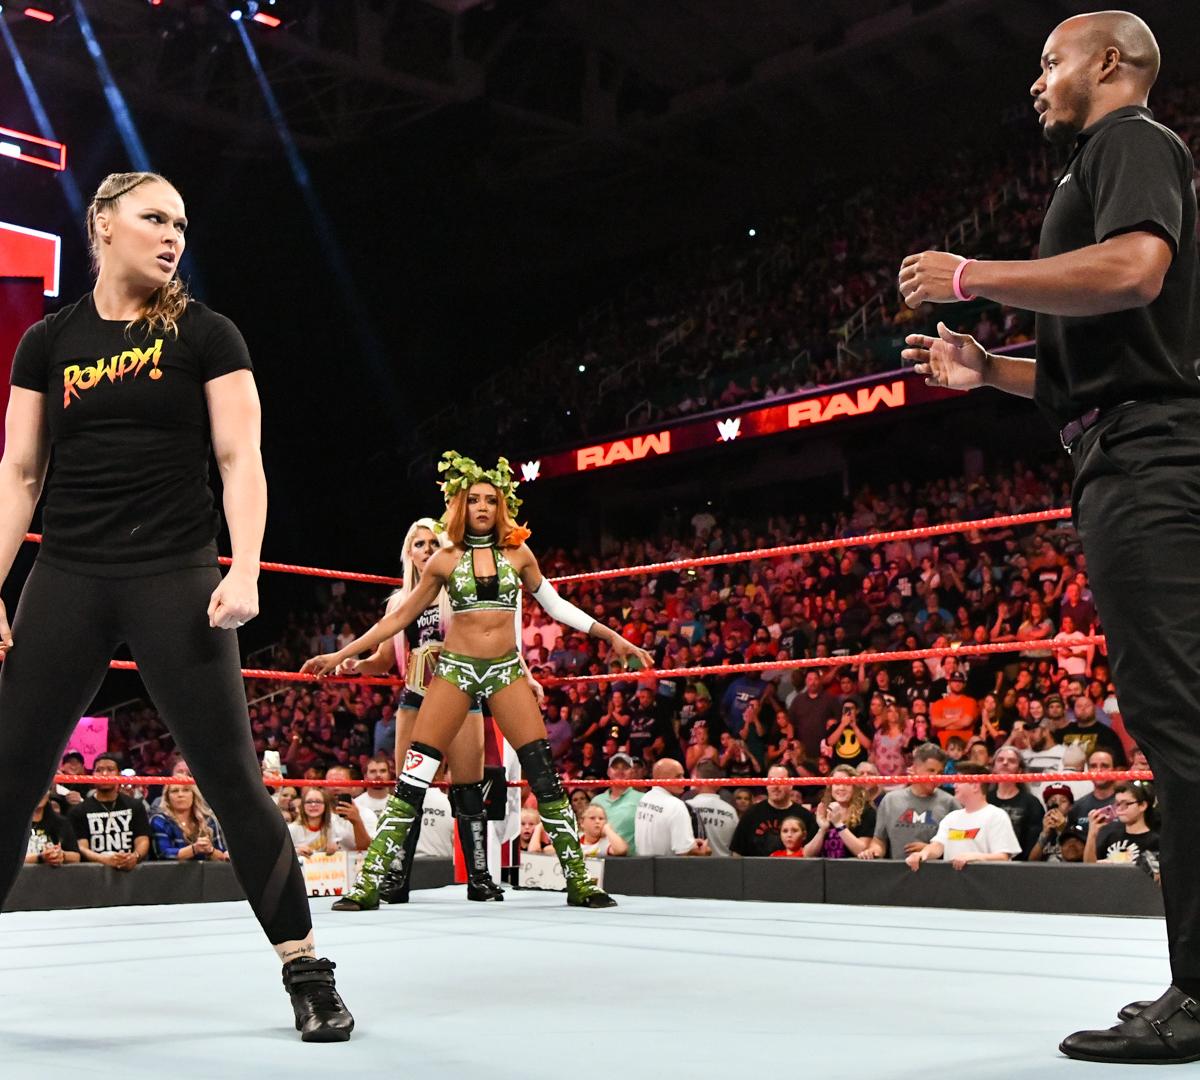 Wwe Raw Results Winners Grades Reaction And Highlights From August 13 Bleacher Report Latest News Videos And Highlights